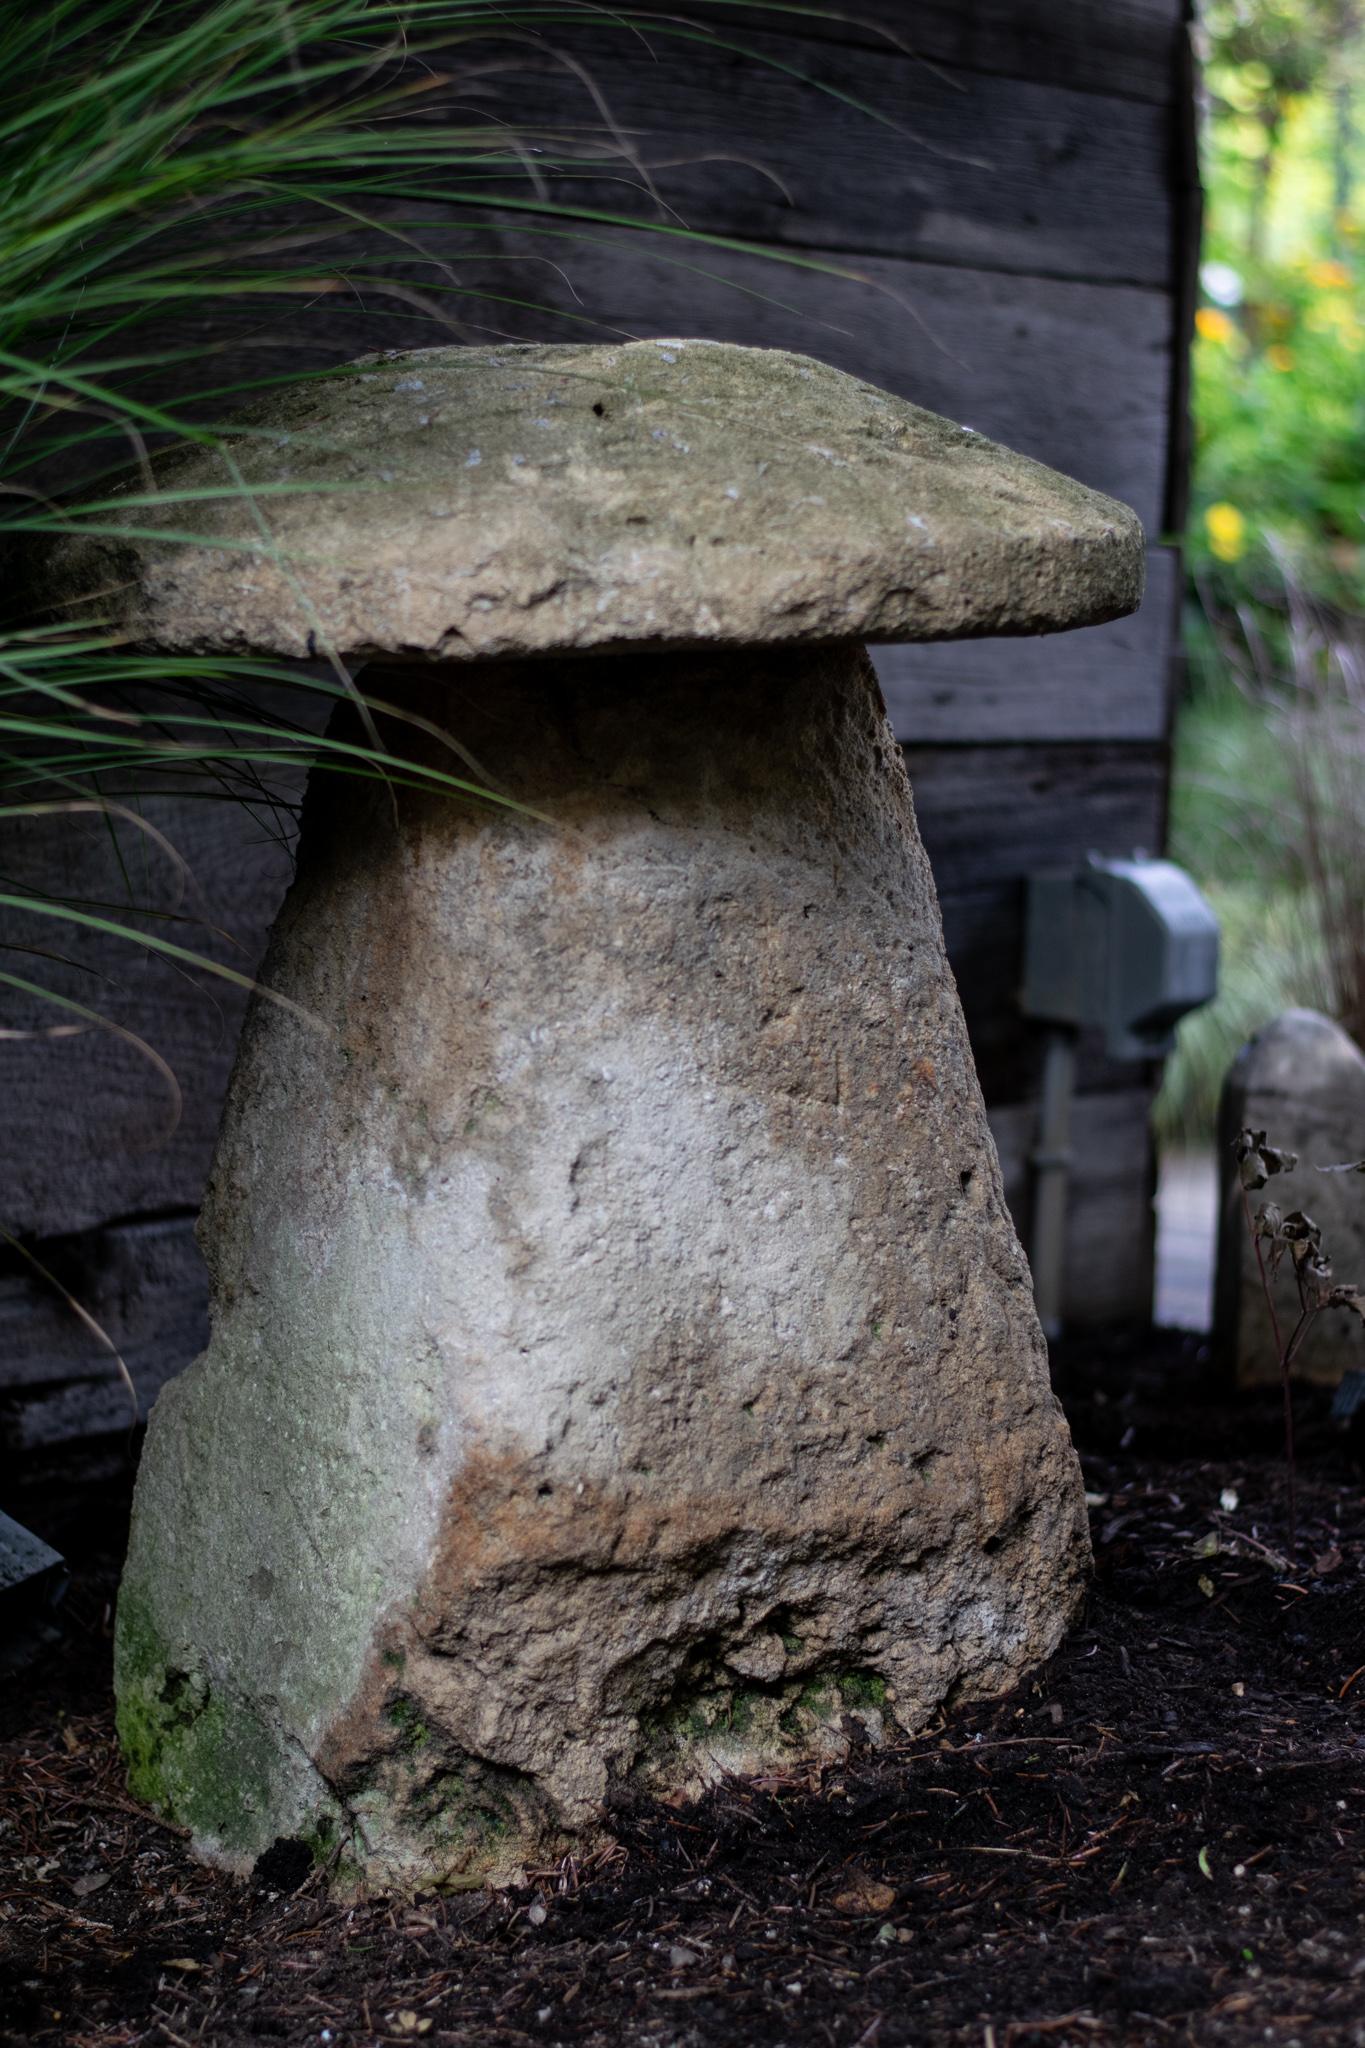 staddle stones for sale